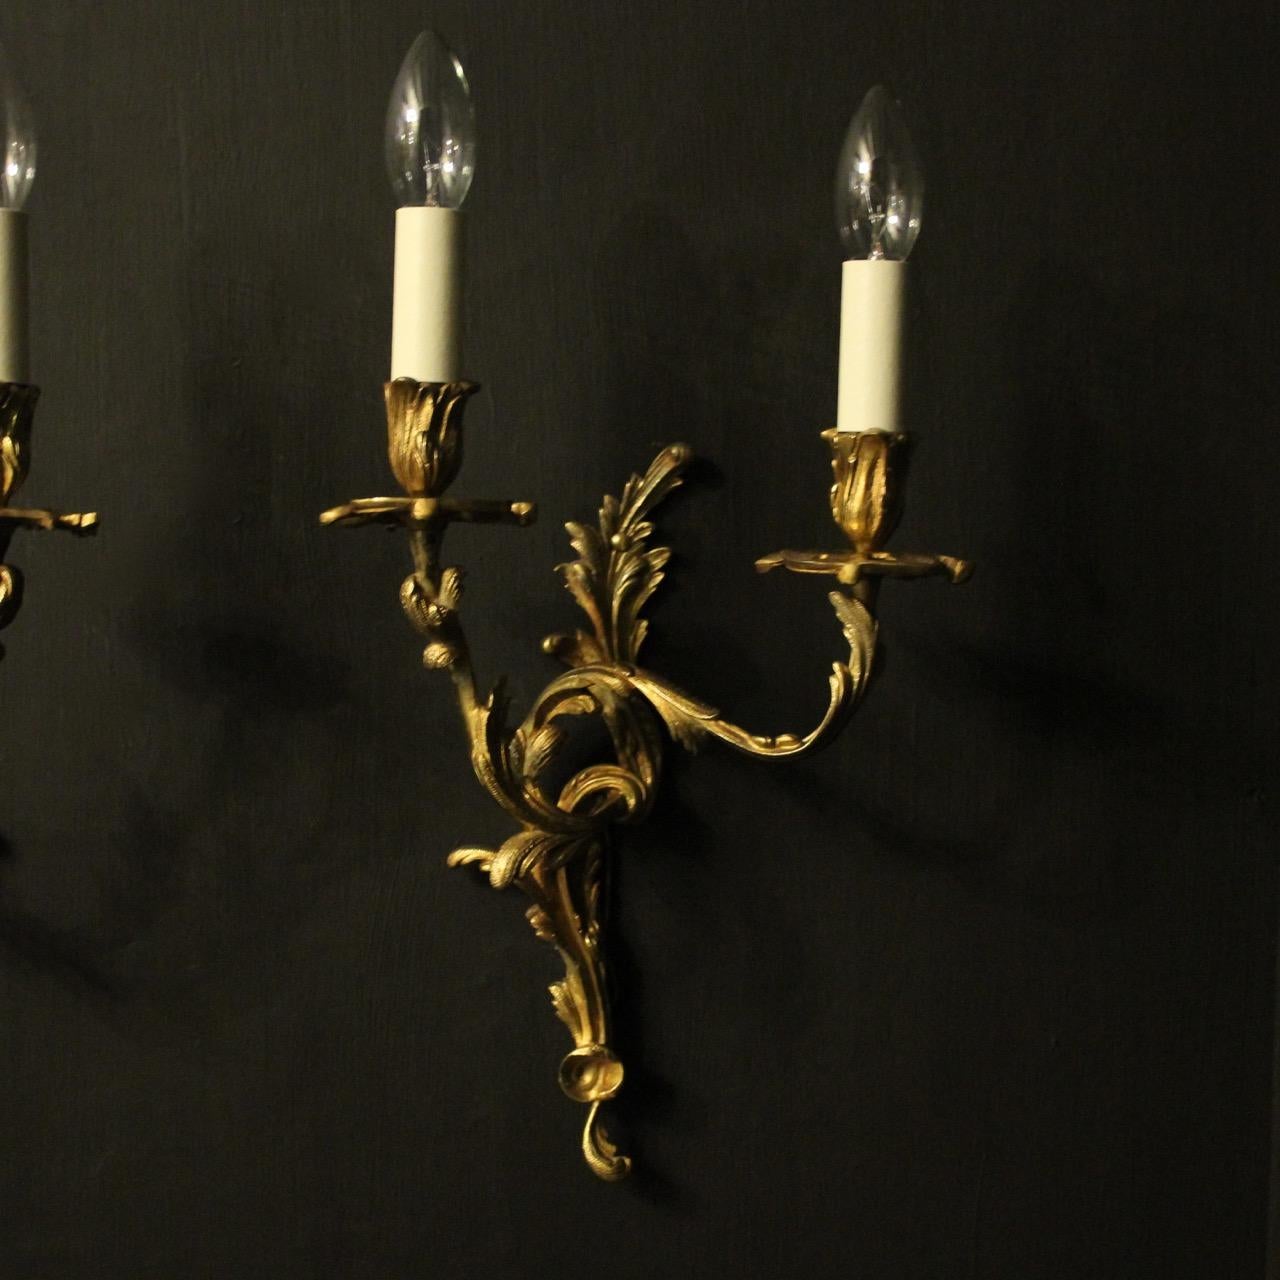 A French pair of gilded bronze twin arm opposing antique wall sconces, the leaf scrolling arms with leaf bobeche drip pans and candle sconces, issuing from a decoratively cast opposing leaf backplate, good original colour and well cast. Fully